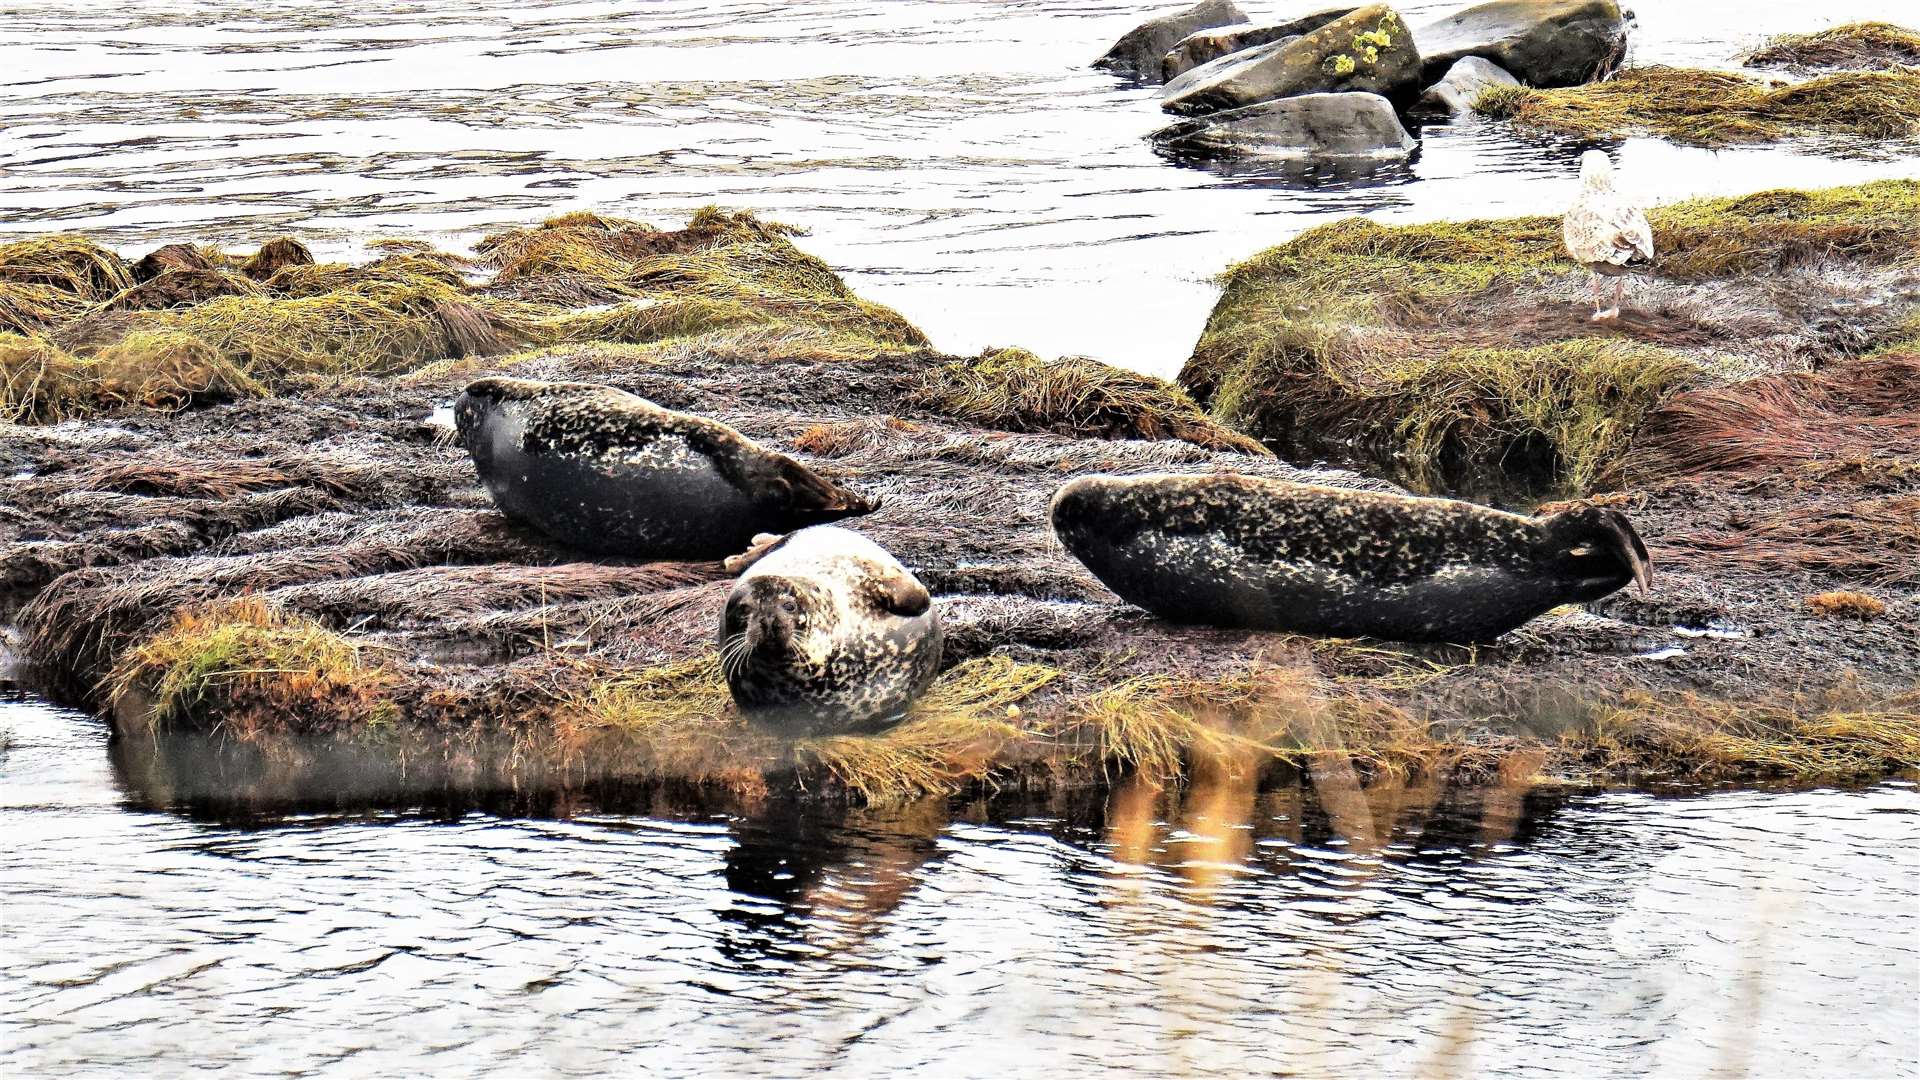 Seals are a popular attraction around the Caithness coastline. These seals were seen hanging out on an island in River Thurso last week. Picture: DGS